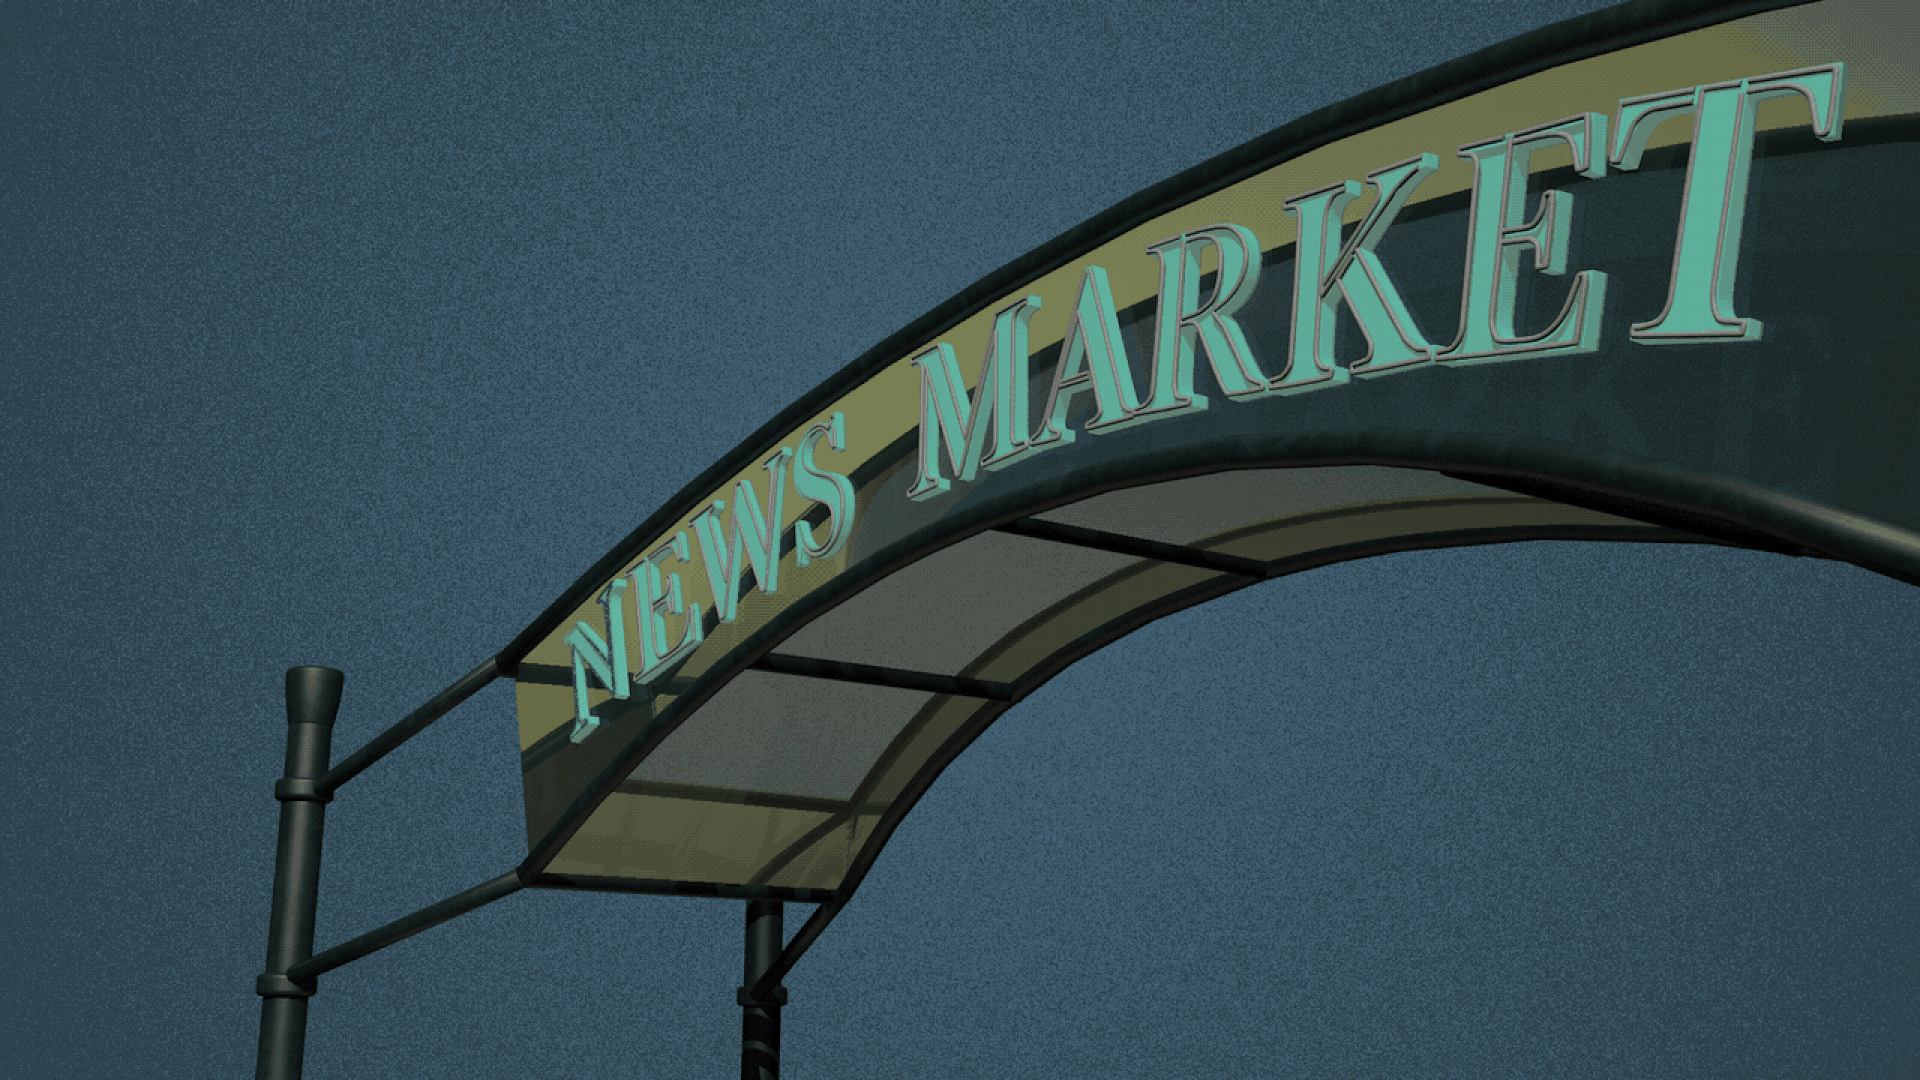 Illustration of a neon sign that reads News Market.